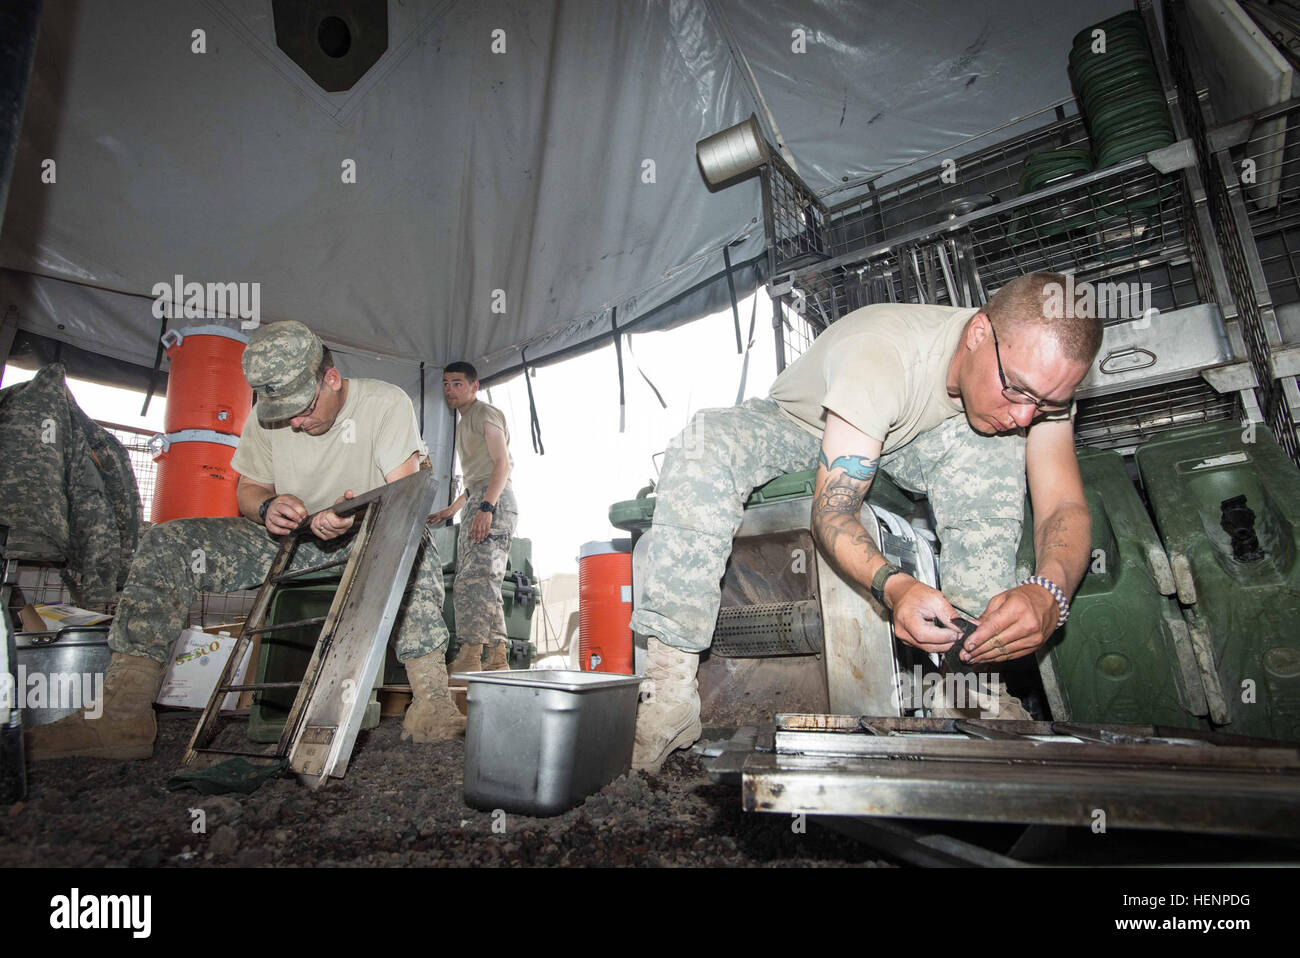 Sgt. Levi Shepherd, an Army cook with Detachment 1, 1186 Military Police Company, supervises Spc. Benjamin Lamb on cleaning grill plates from a military field stove, on Aug. 19. Shepherd, of Dayton, Wash., volunteered to perform an additional three weeks of Army training to help the 3rd Battalion, 116th Heavy Brigade Combat Team cook section during the battalion's annual training at the Orchard Training Center, Idaho. The cook section feeds more than 500 Soldiers every day during training. (Photo by U.S. Army Maj. Wayne (Chris) Clyne, 115th Mobile Public Affairs Detachment, Oregon Army Nationa Stock Photo